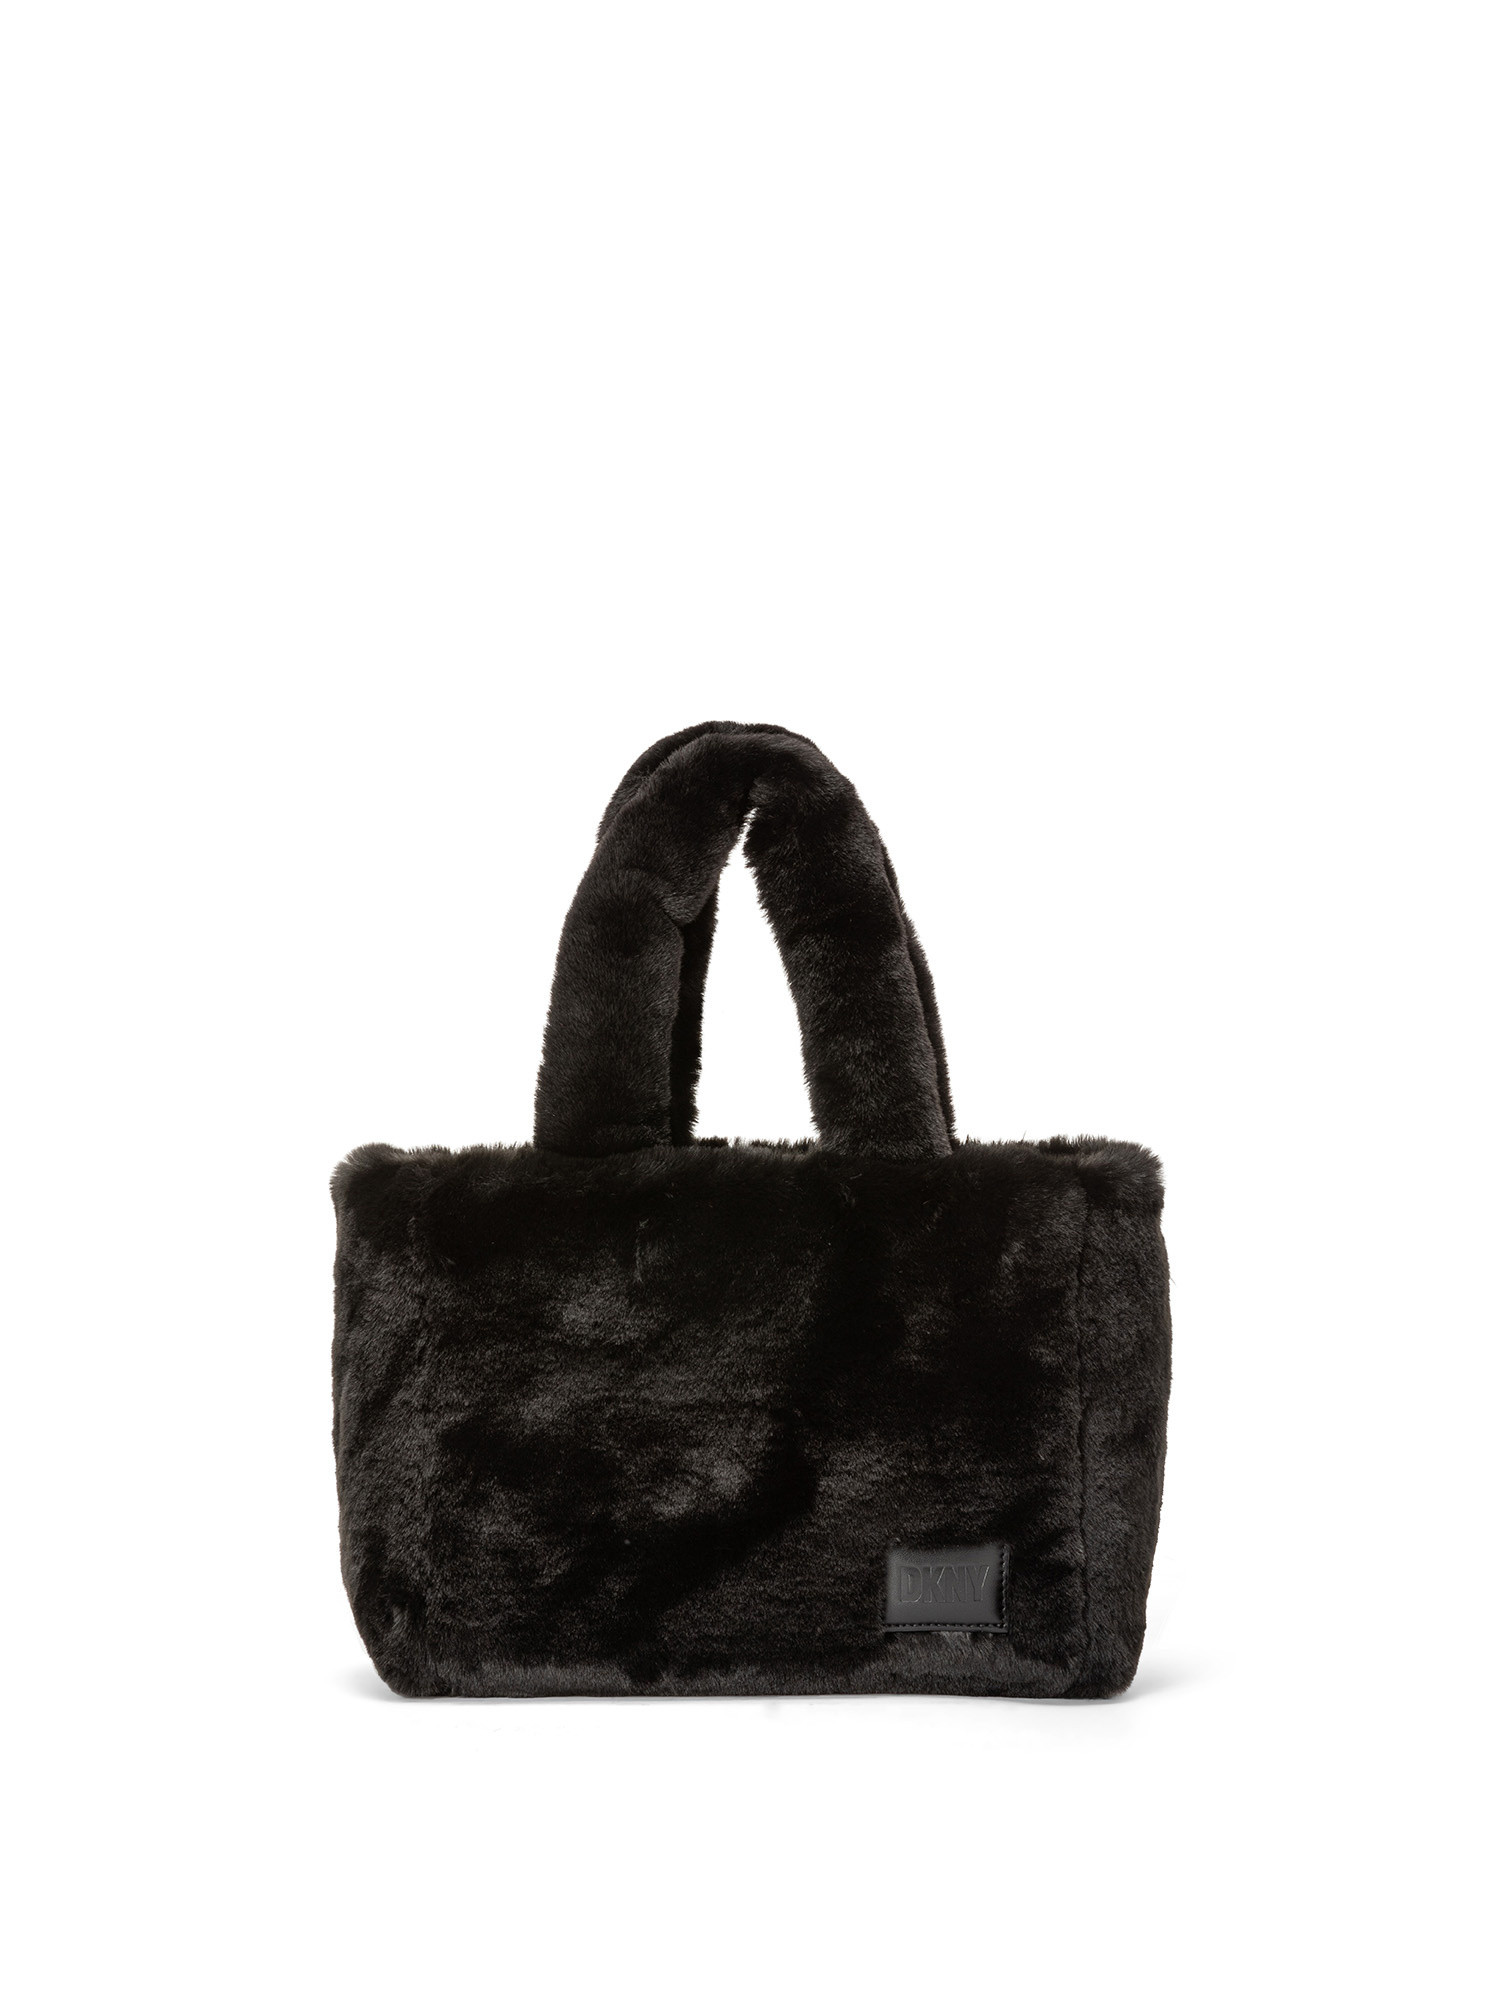 DKNY - Borsa a tracolla, Nero, large image number 0